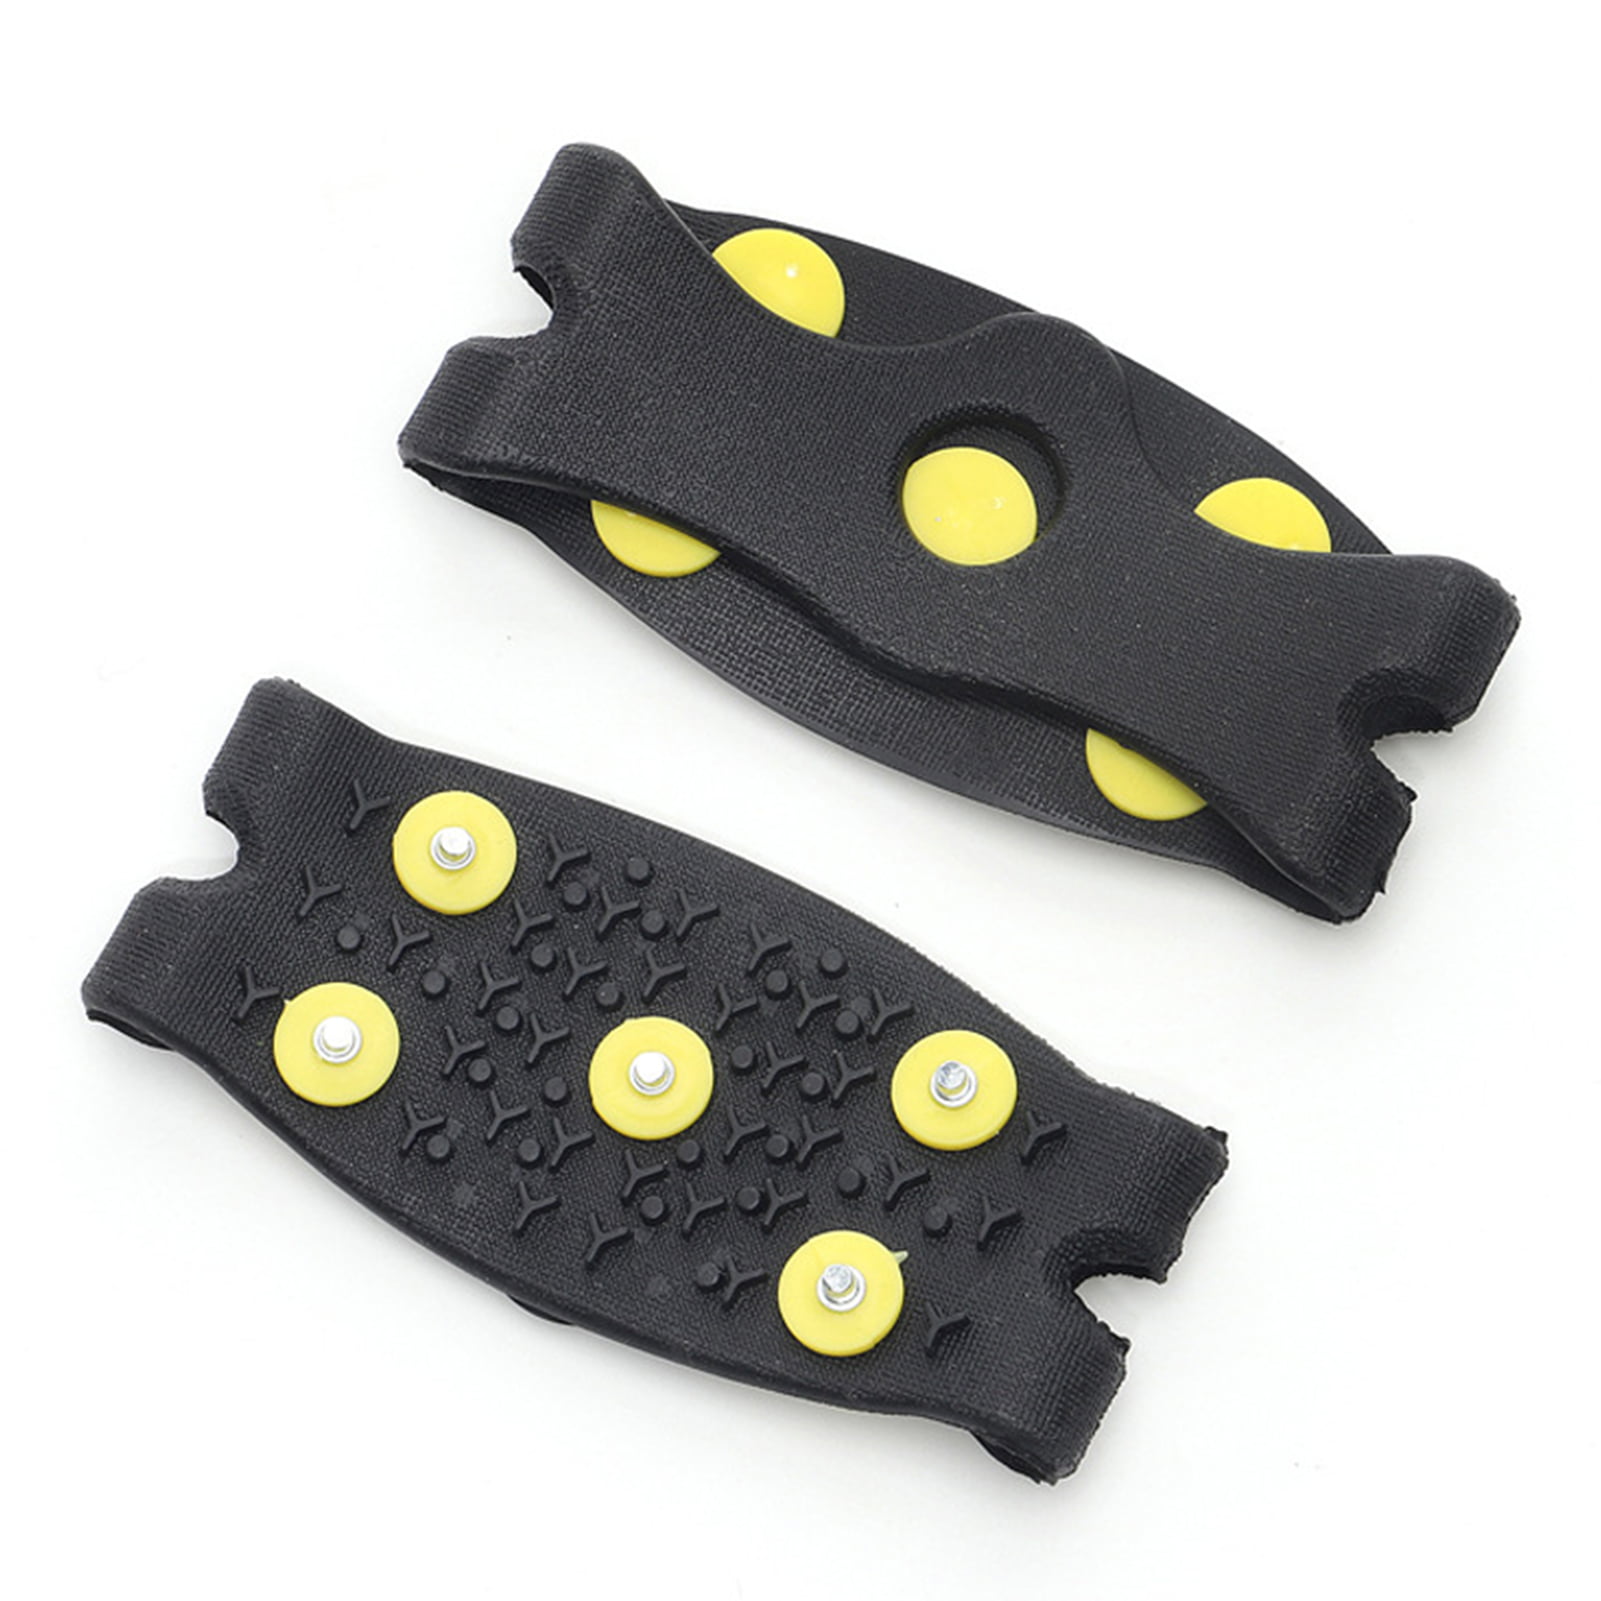 Anti Slip Spikes Grips 5-Stud Shoes Cover Crampon Ice Climbing Equipment Snow 